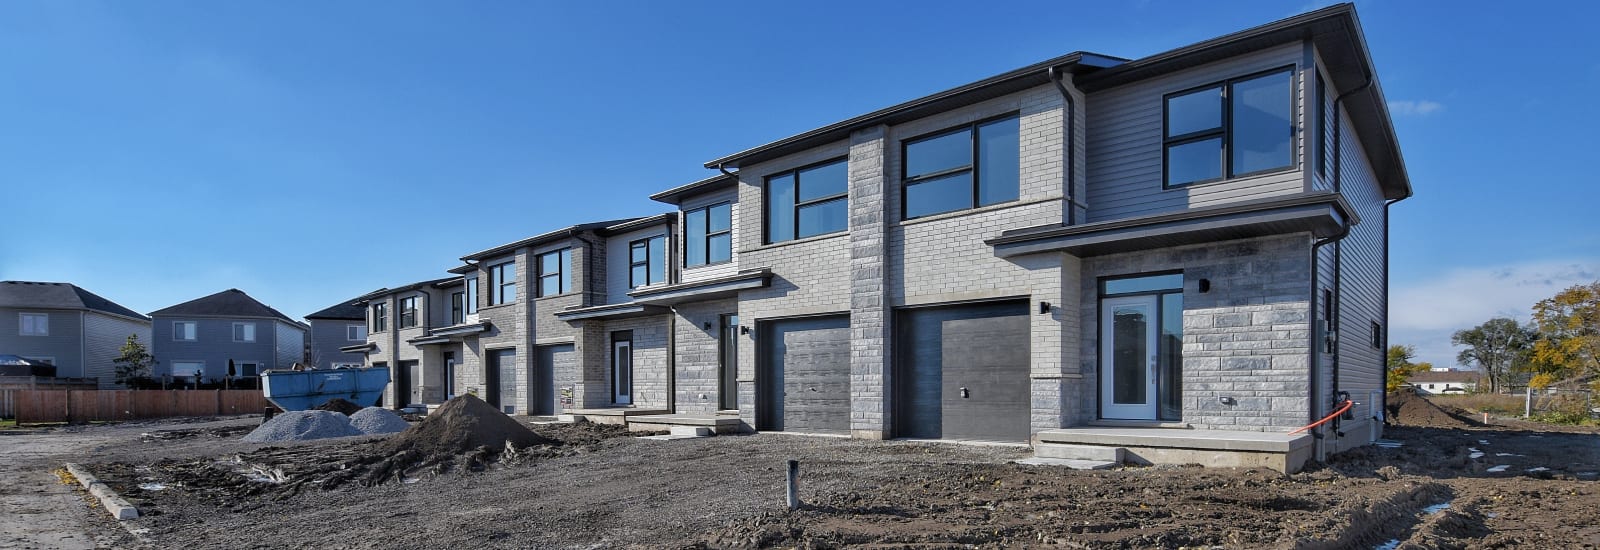 Building Projects with Cairnwood Homes, Subdivision Builders in Niagara